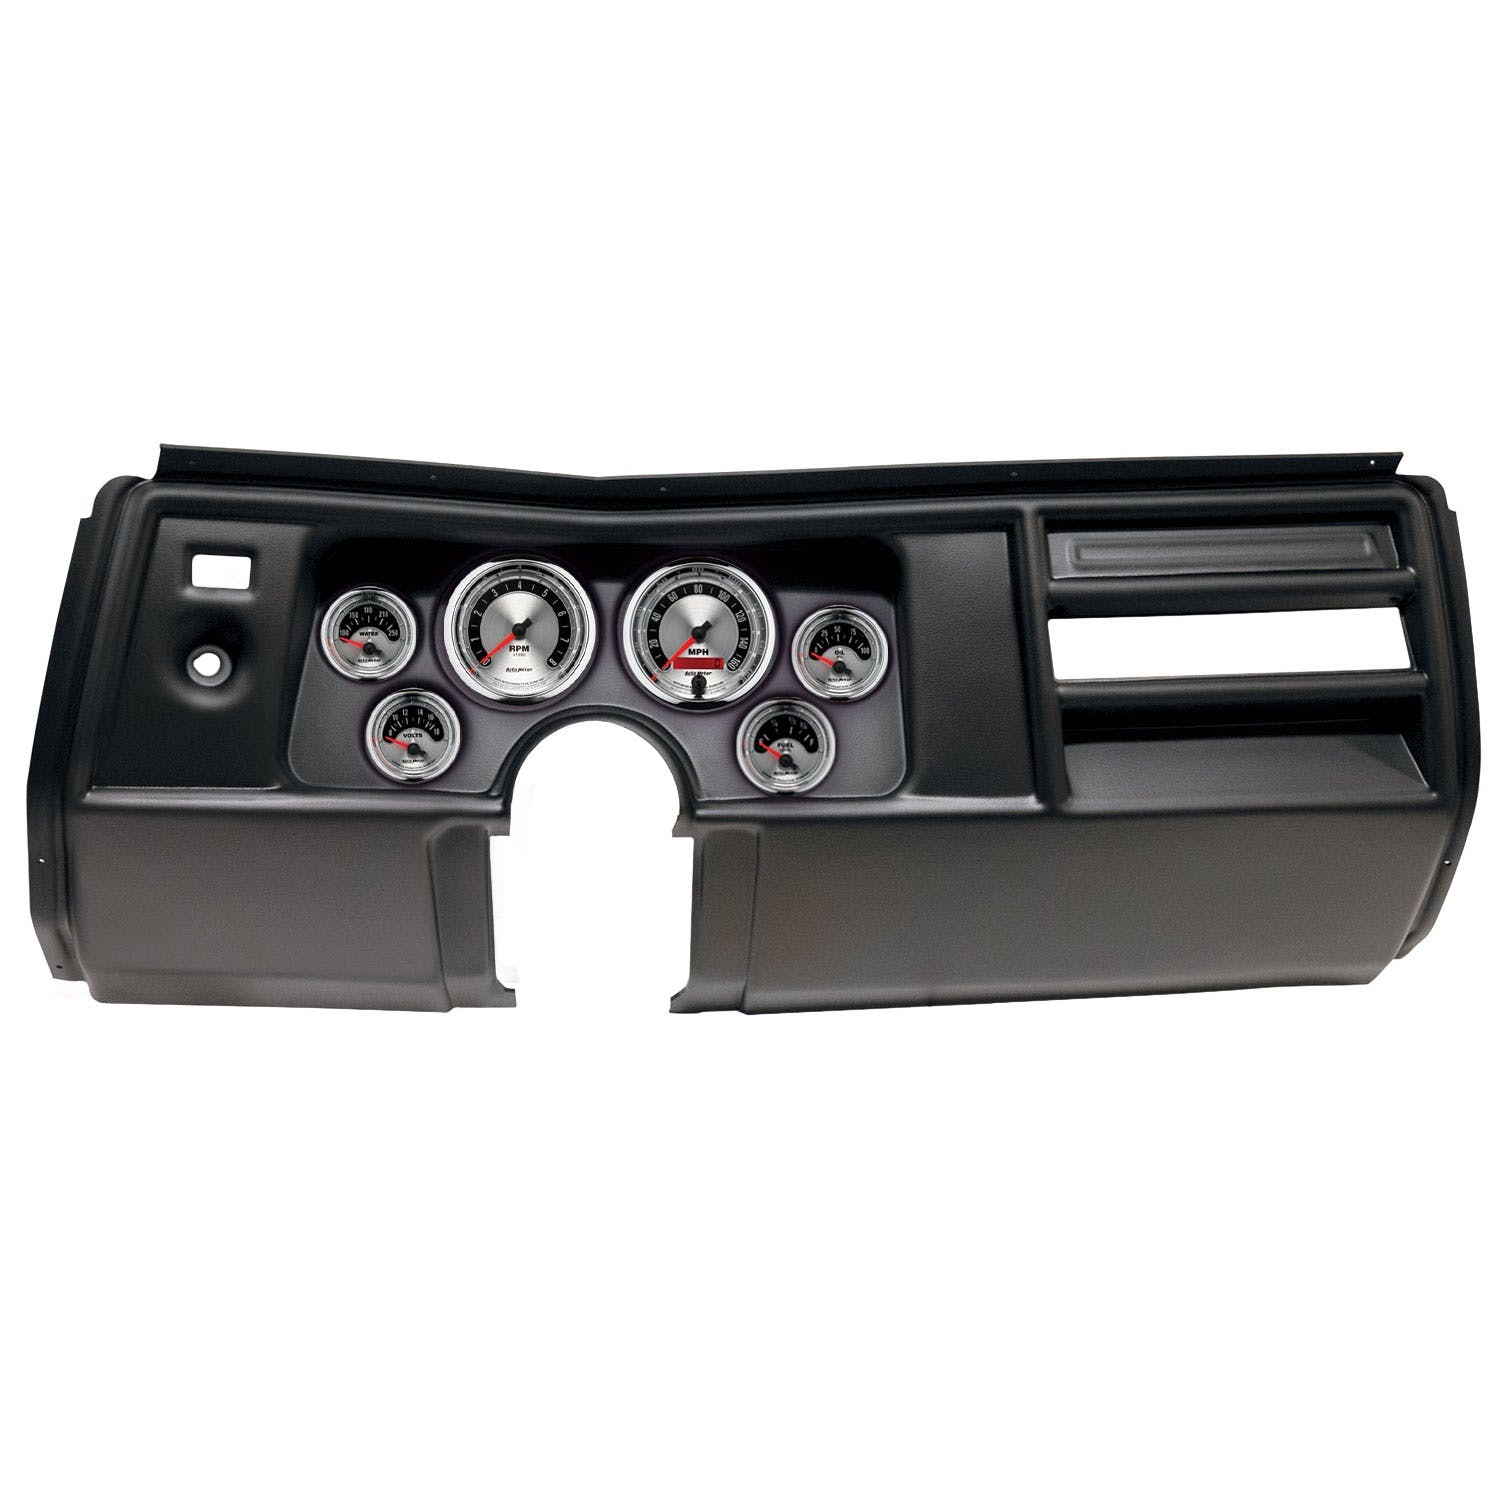 AutoMeter Products 2908-01 6 Gauge Direct-Fit Dash Kit, Chevy Chevelle No Vent 69, American Muscle